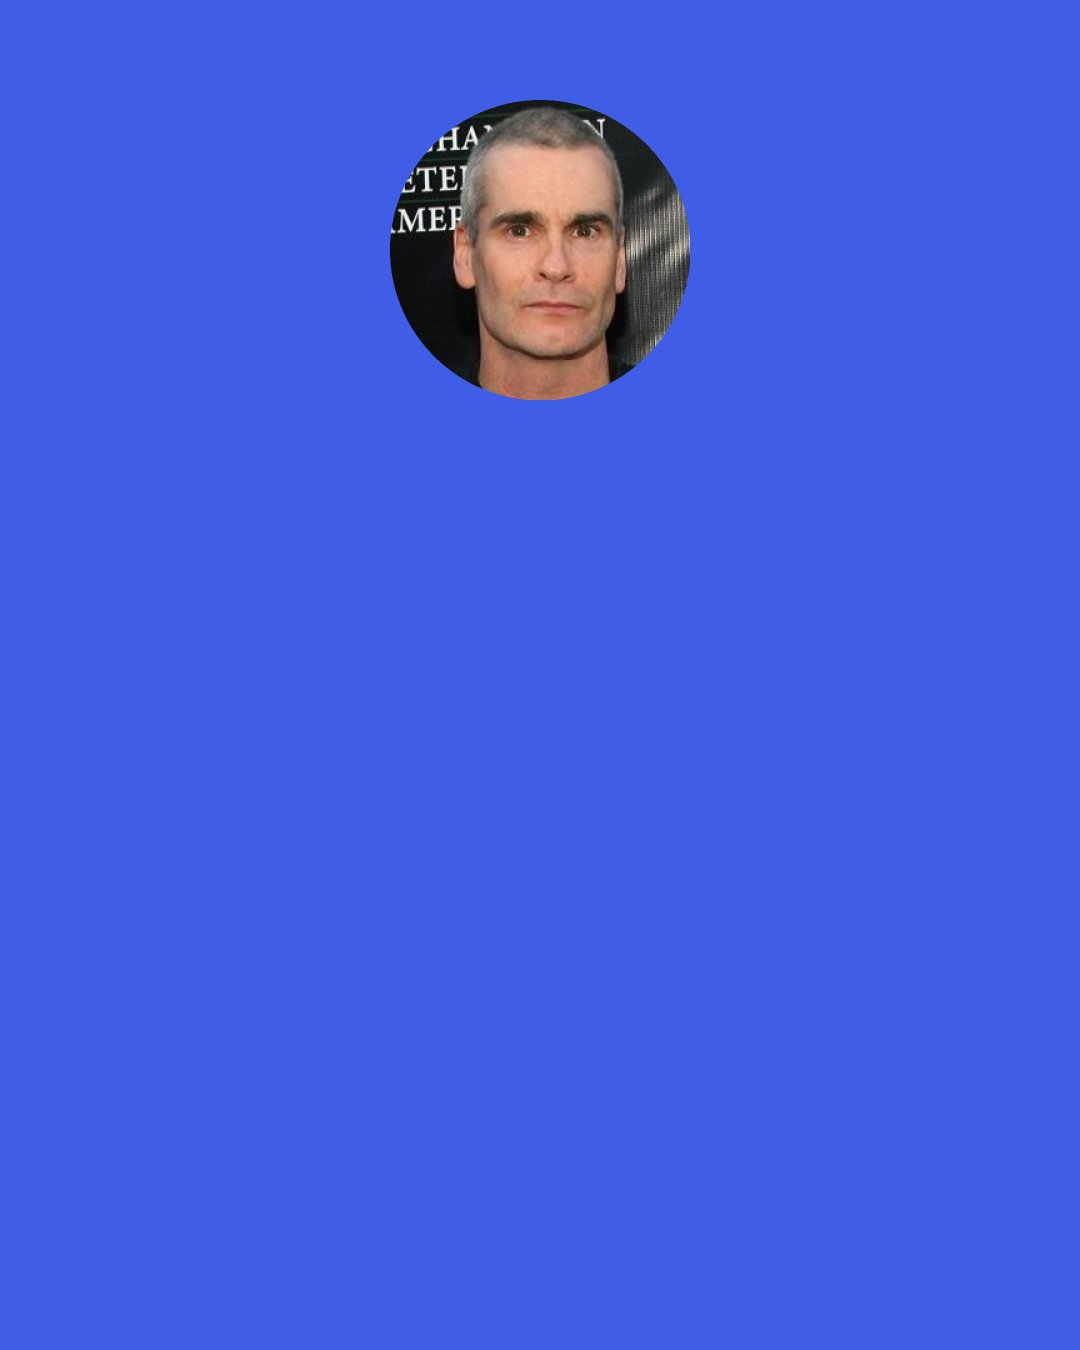 Henry Rollins: What I've found is that a lot of soldiers are surprisingly apolitical. Their reality is, "Today I'm going to leave the gate for twelve hours, and I'm going to make it back to the dining facility by sundown with the arms and legs of me and my buddies intact."